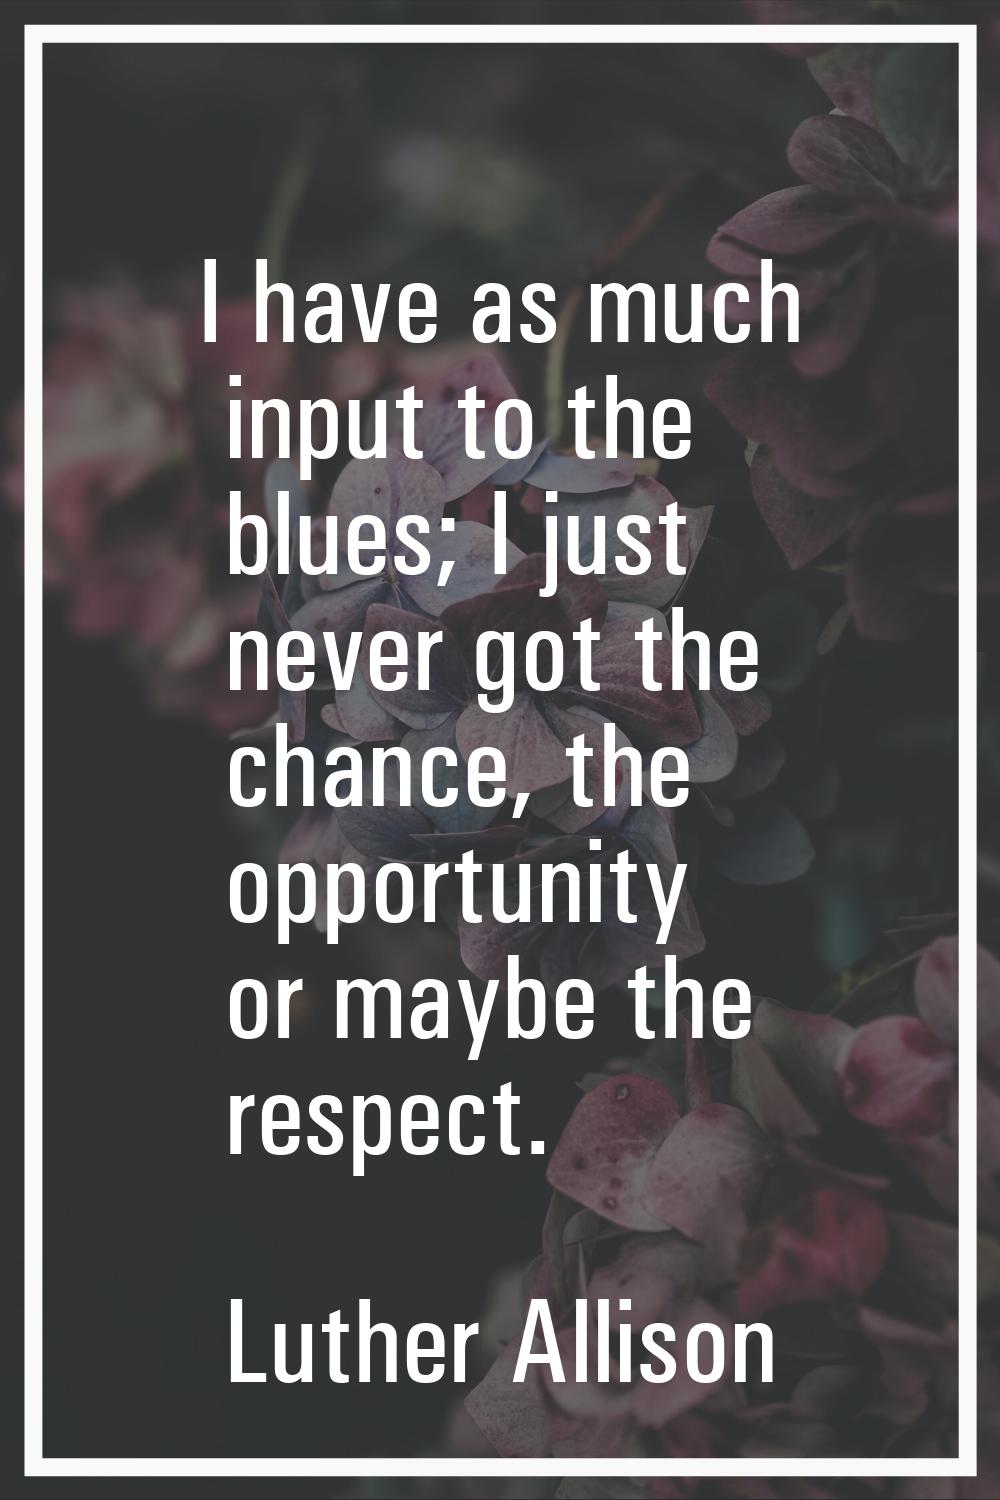 I have as much input to the blues; I just never got the chance, the opportunity or maybe the respec